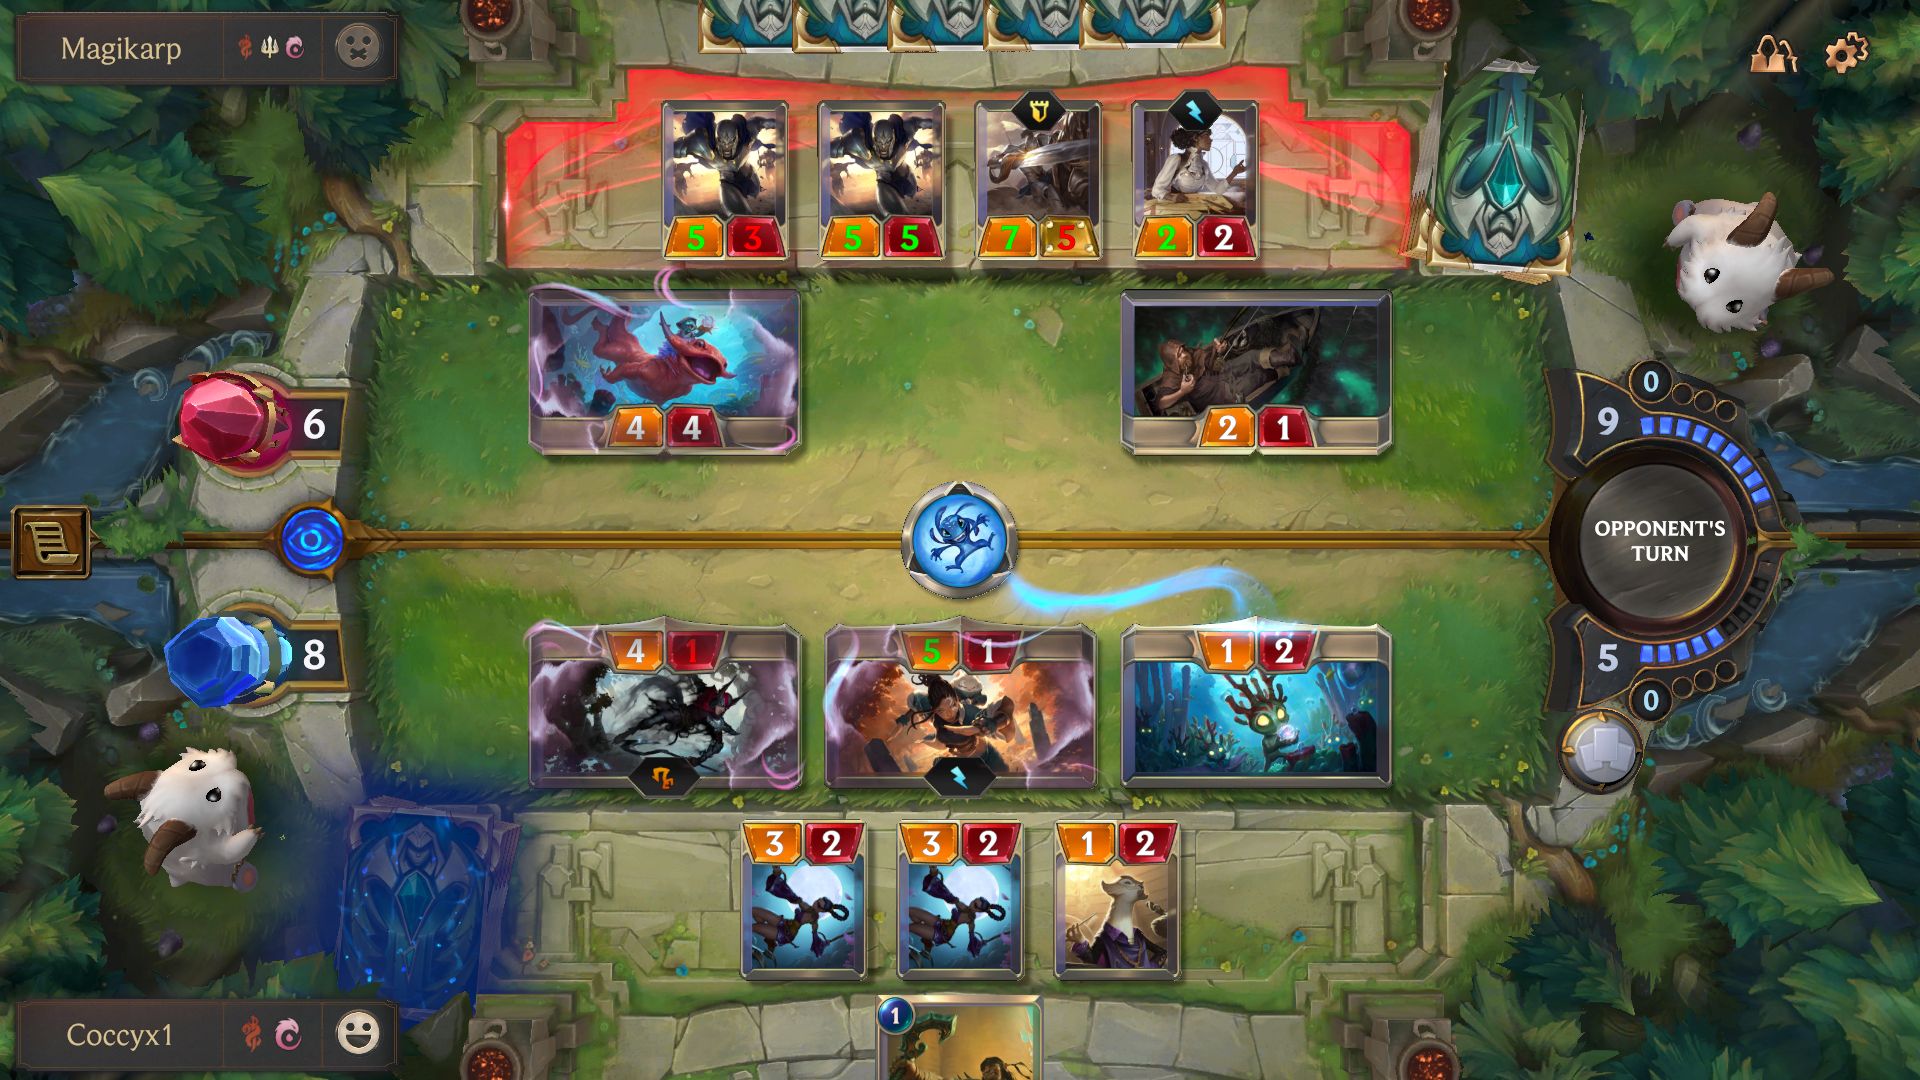 Image for Runeterra is out of beta, and the new cards make it worth playing again